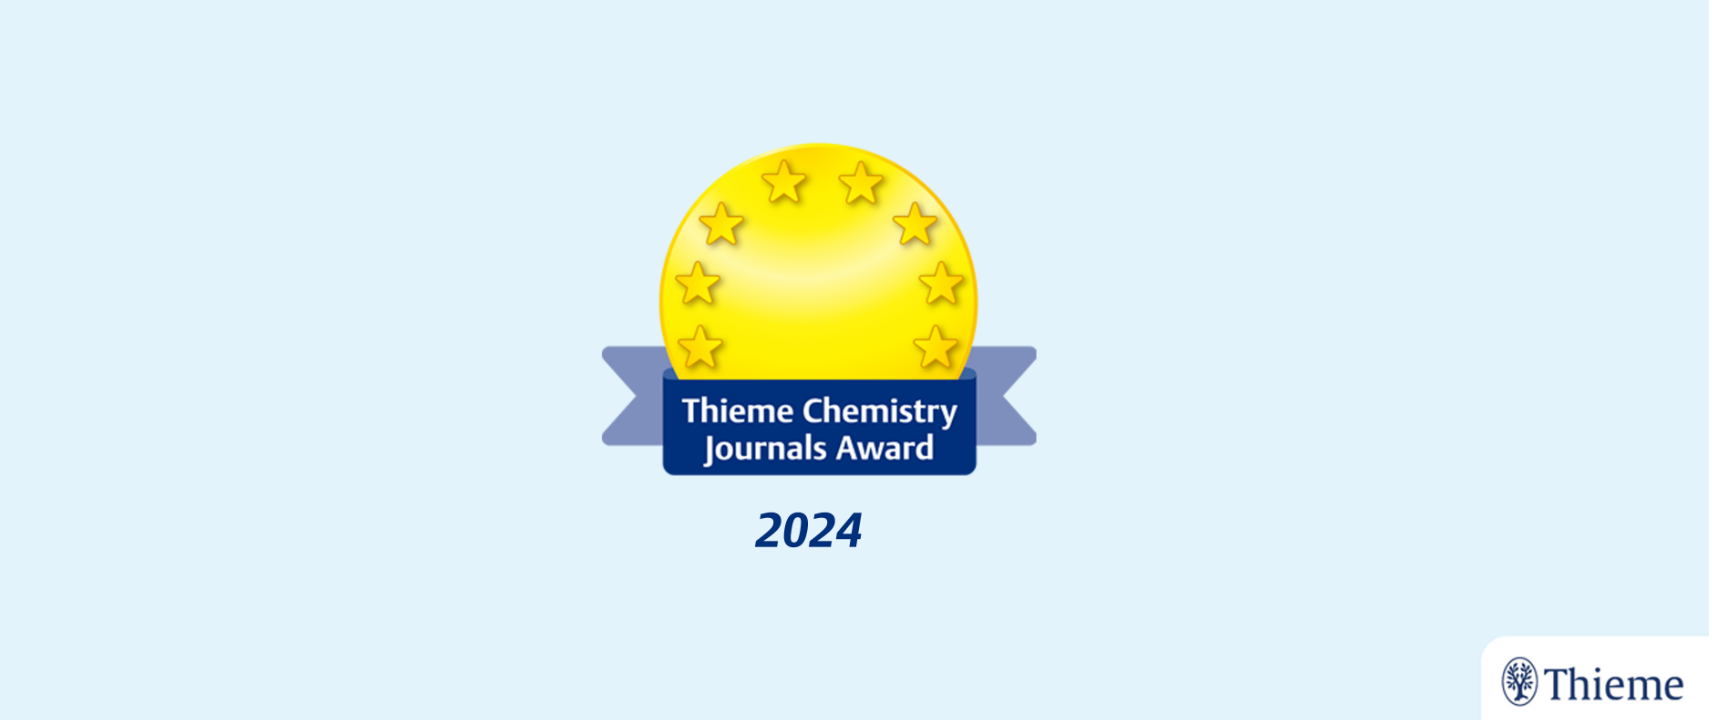 Warm congratulations to Professor Shi Qinqin of the research group for winning the "Thieme Chemistry Journals Award"